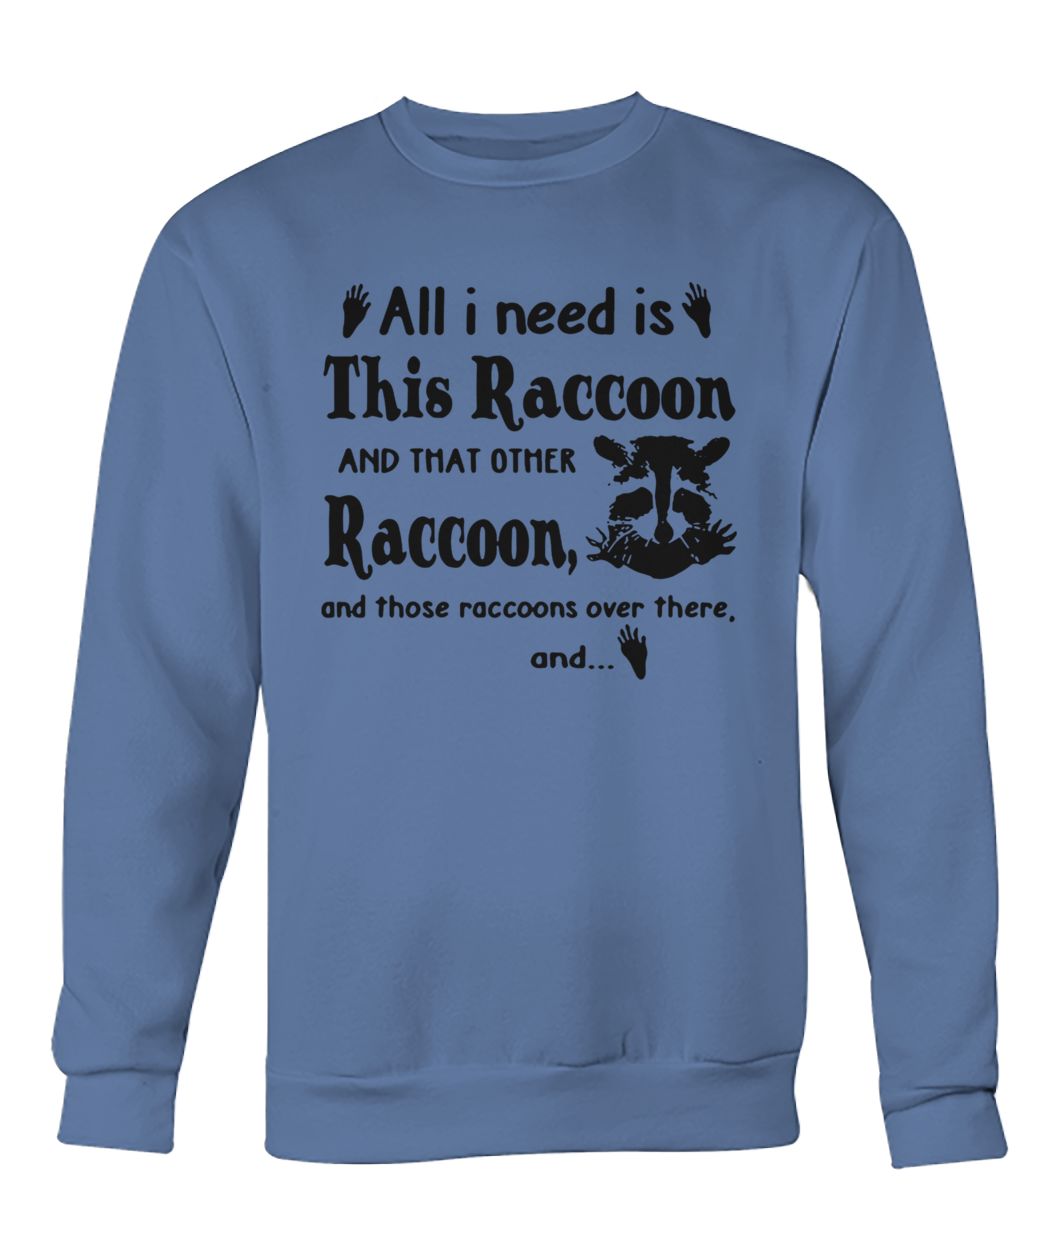 All I need is this raccoon and that other raccoon and those raccoons over there and crew neck sweatshirt